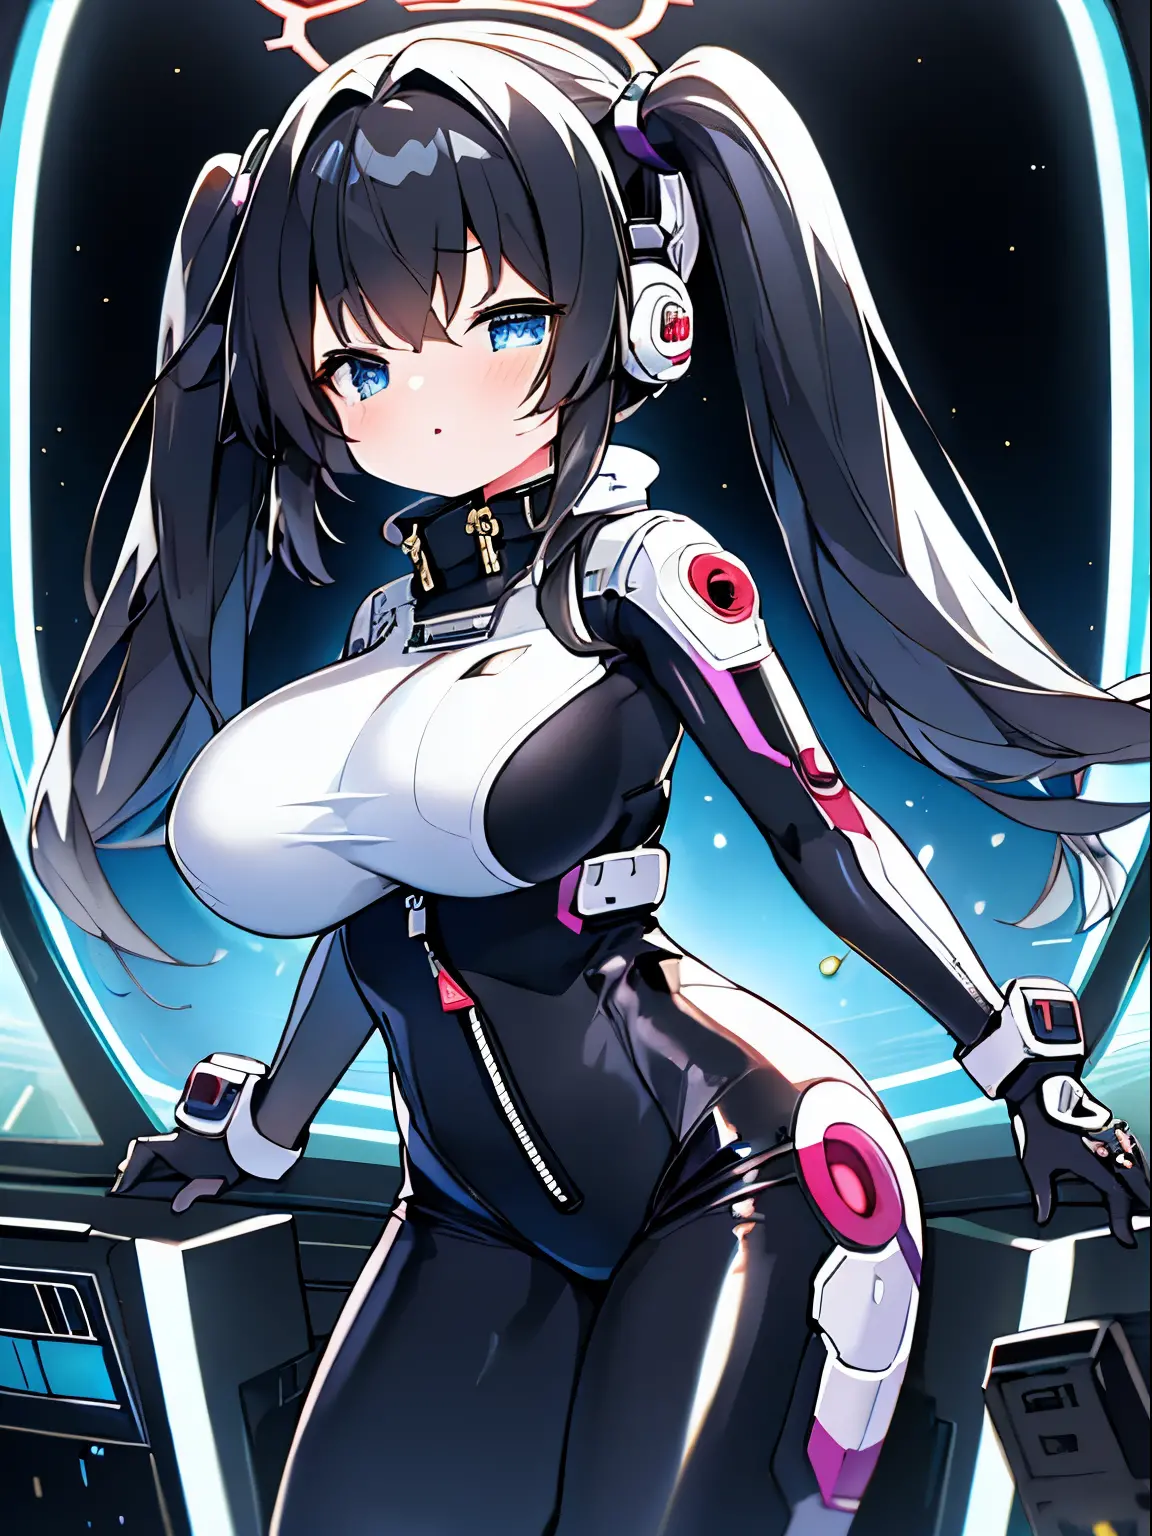 very detailed、masterpiece、high quality、one high school girl、12 years old、Loli、(black and white space suit、accent)、front zipper、(Futuristic, Tight Fit Bodysuit)、headphone、Cyberpunk space station interior background、(colorful golden hair),ロングtwin tails, (blu...